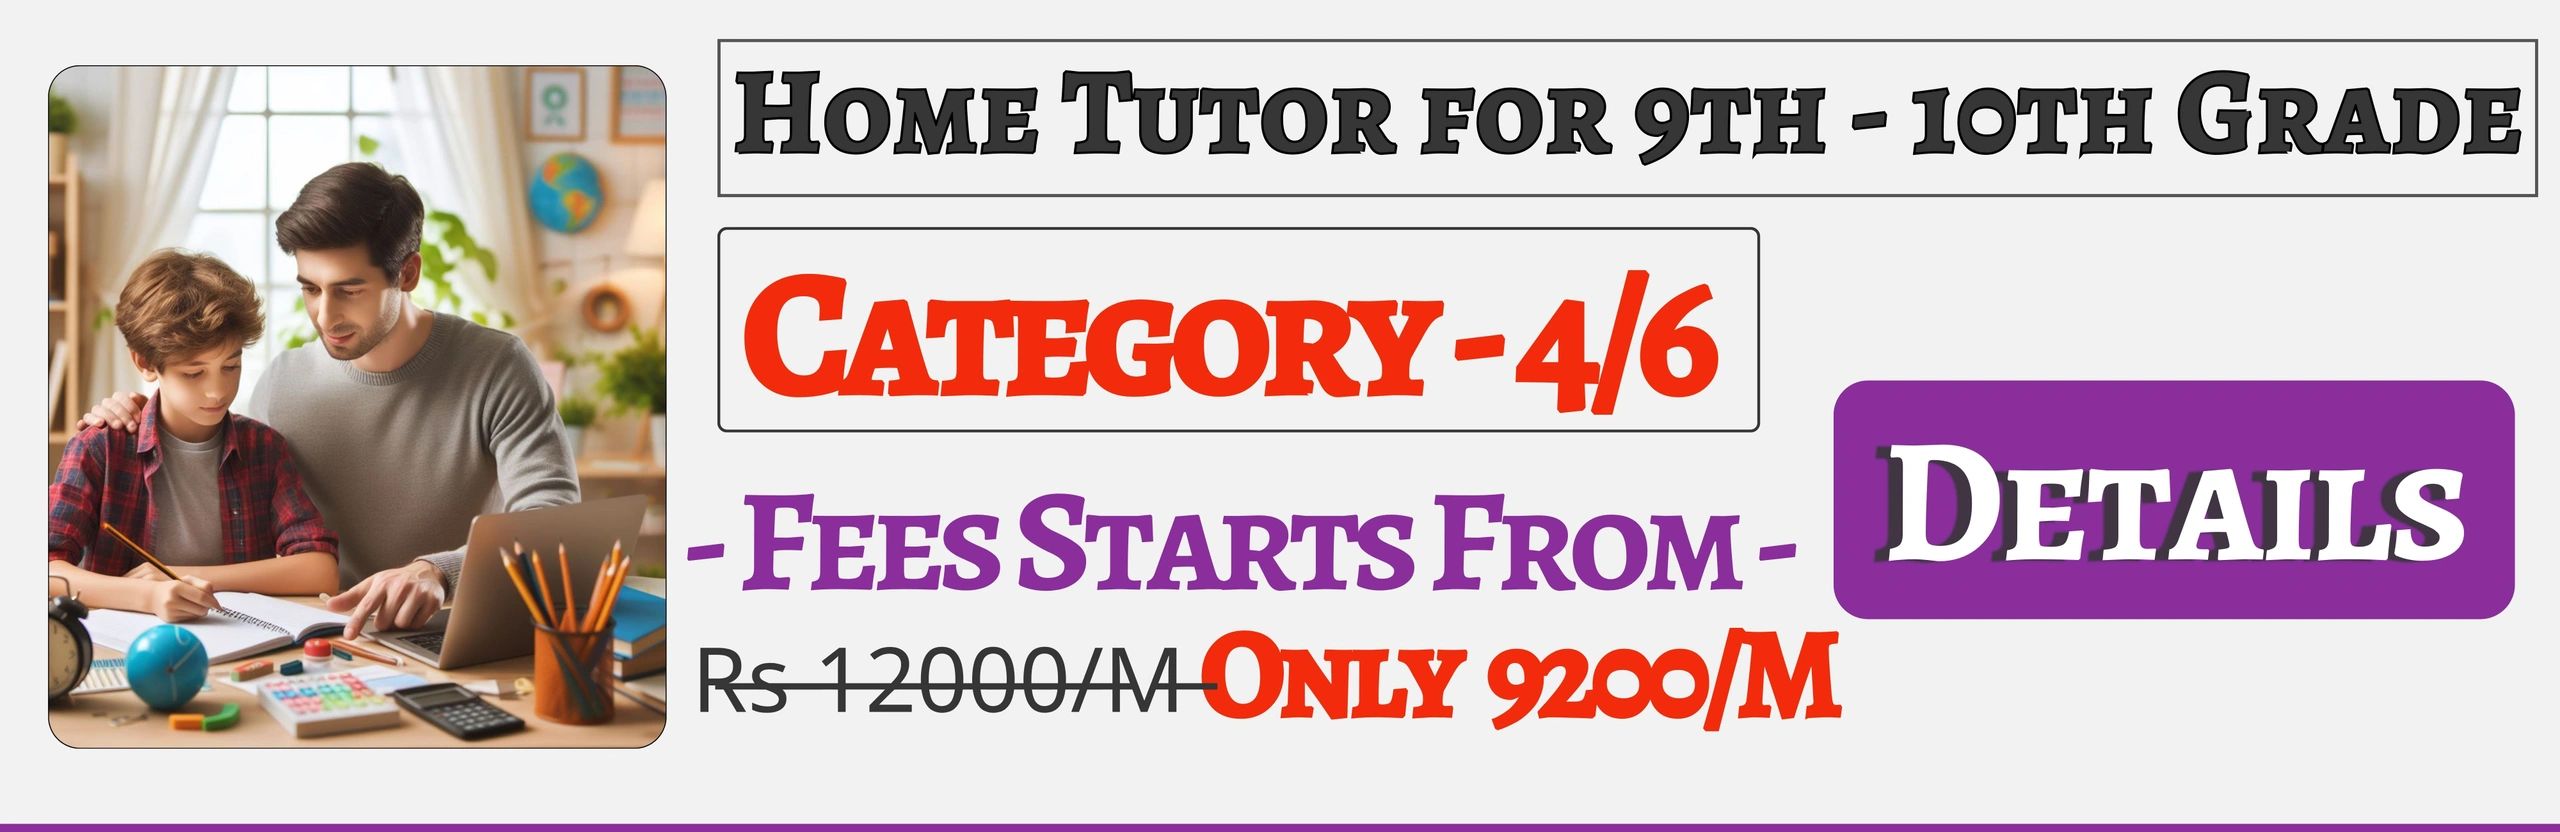 Book Best Home Tuition Tutors For 9th & 10th In Jaipur , Fees Only 9200/M